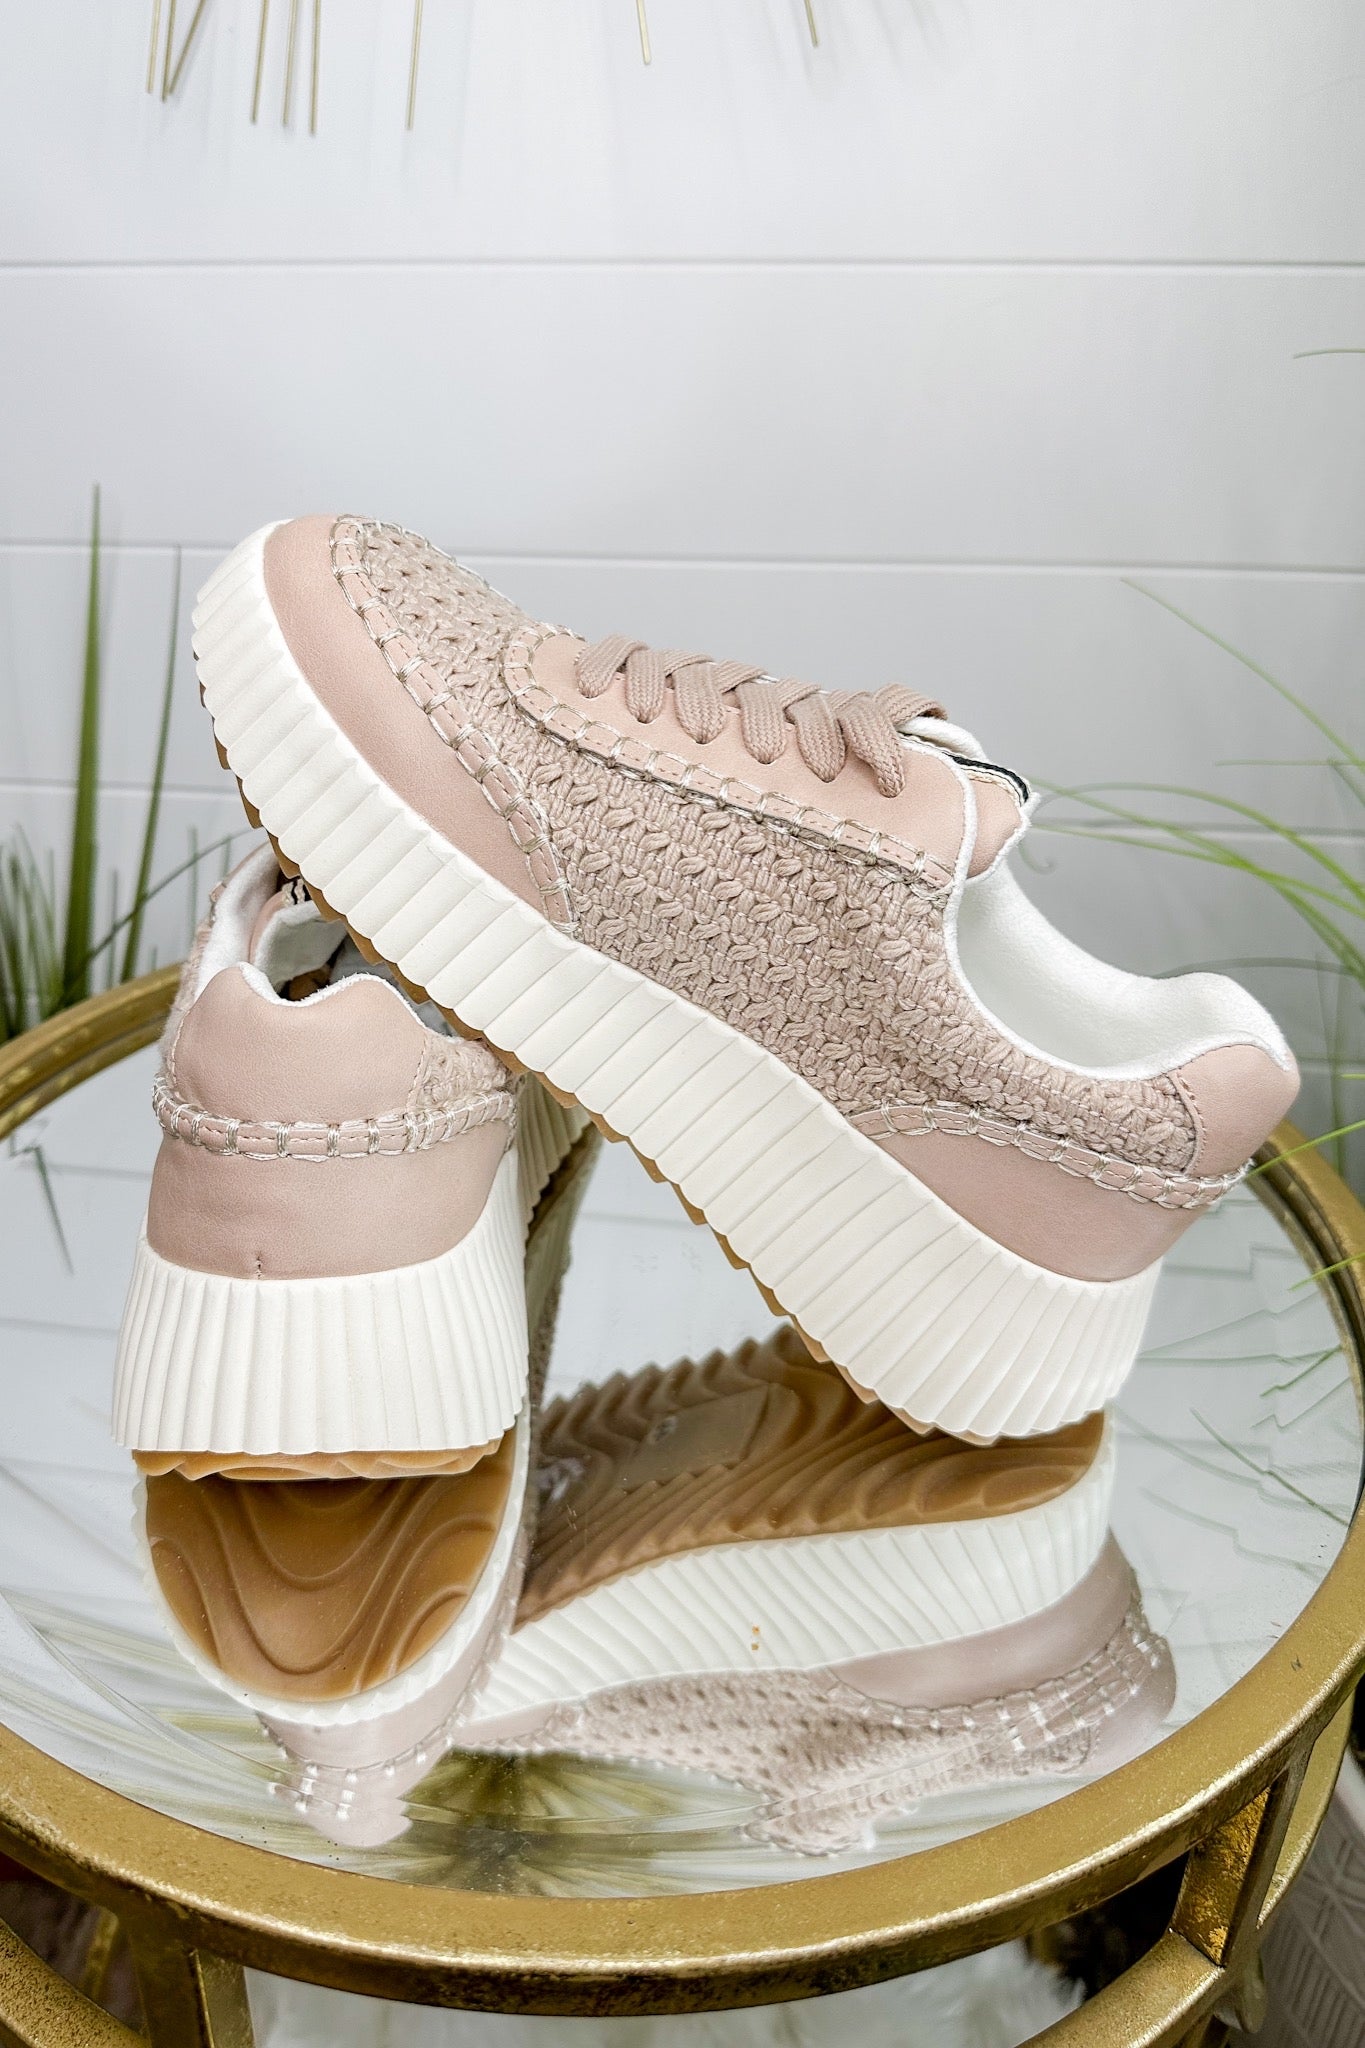 The Selina Woven Sneaker in Mauve by ShuShop